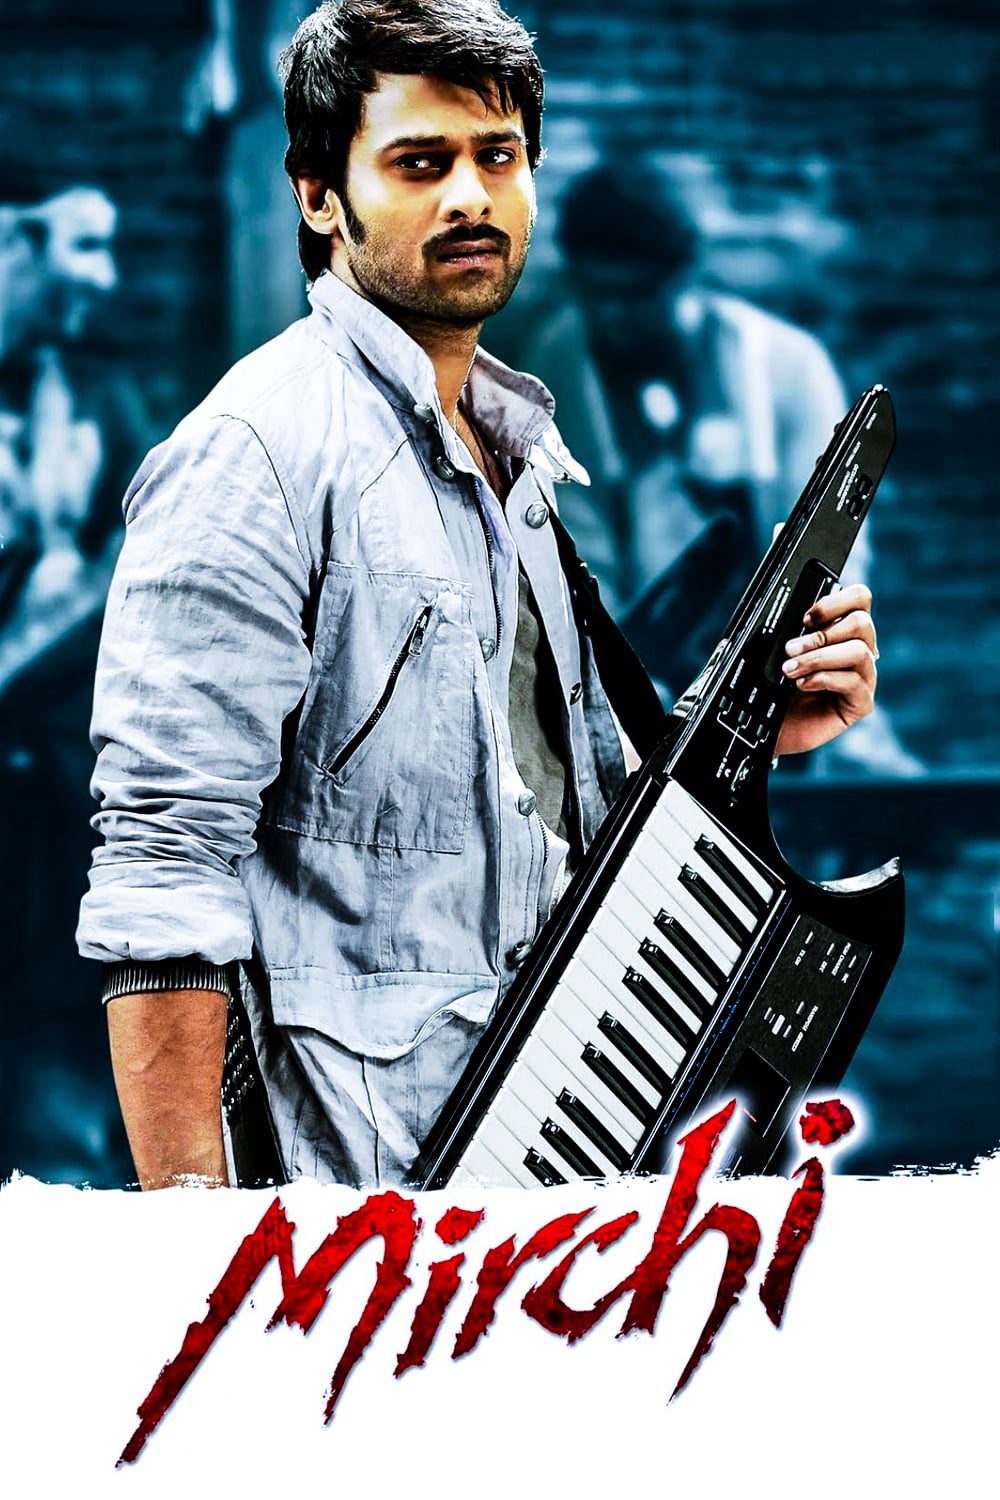 Poster for the movie "Mirchi"